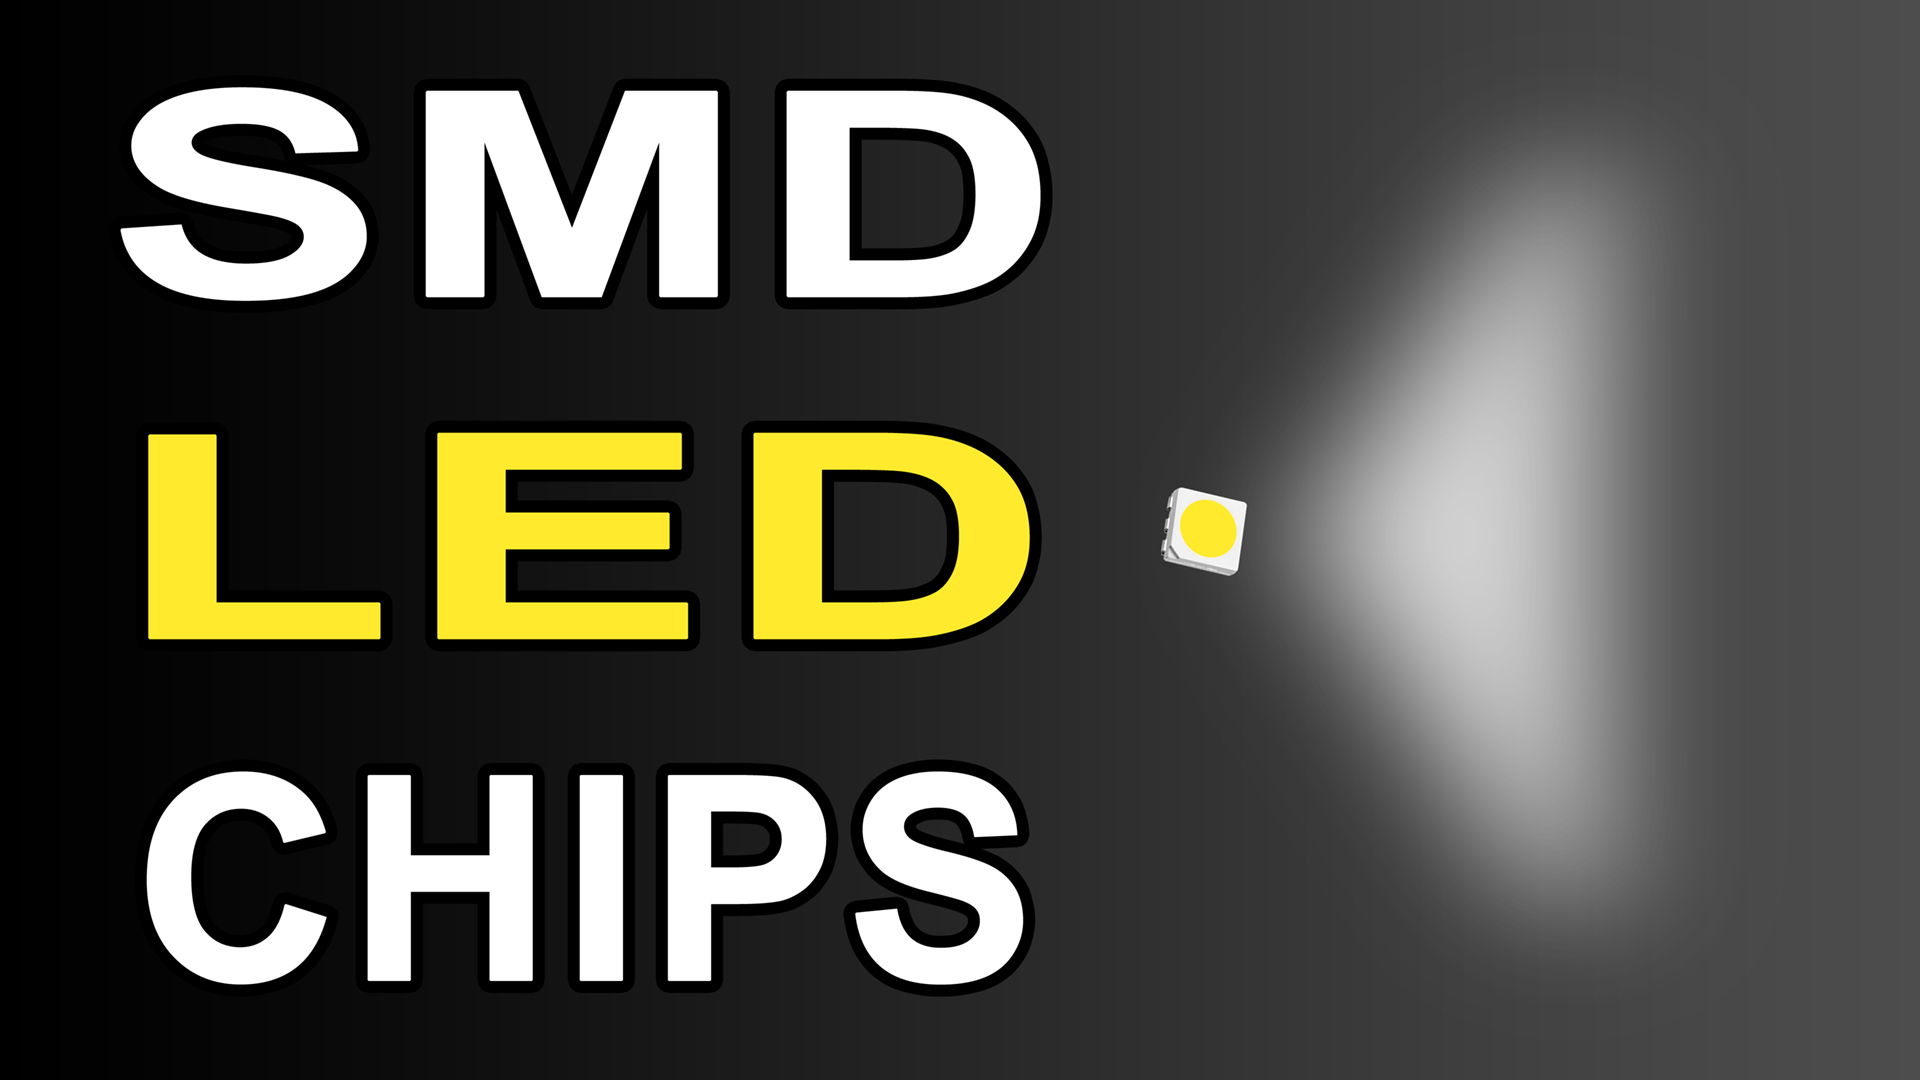 SMD LED Chips Characteristics Comparison: Size, Power, Efficacy